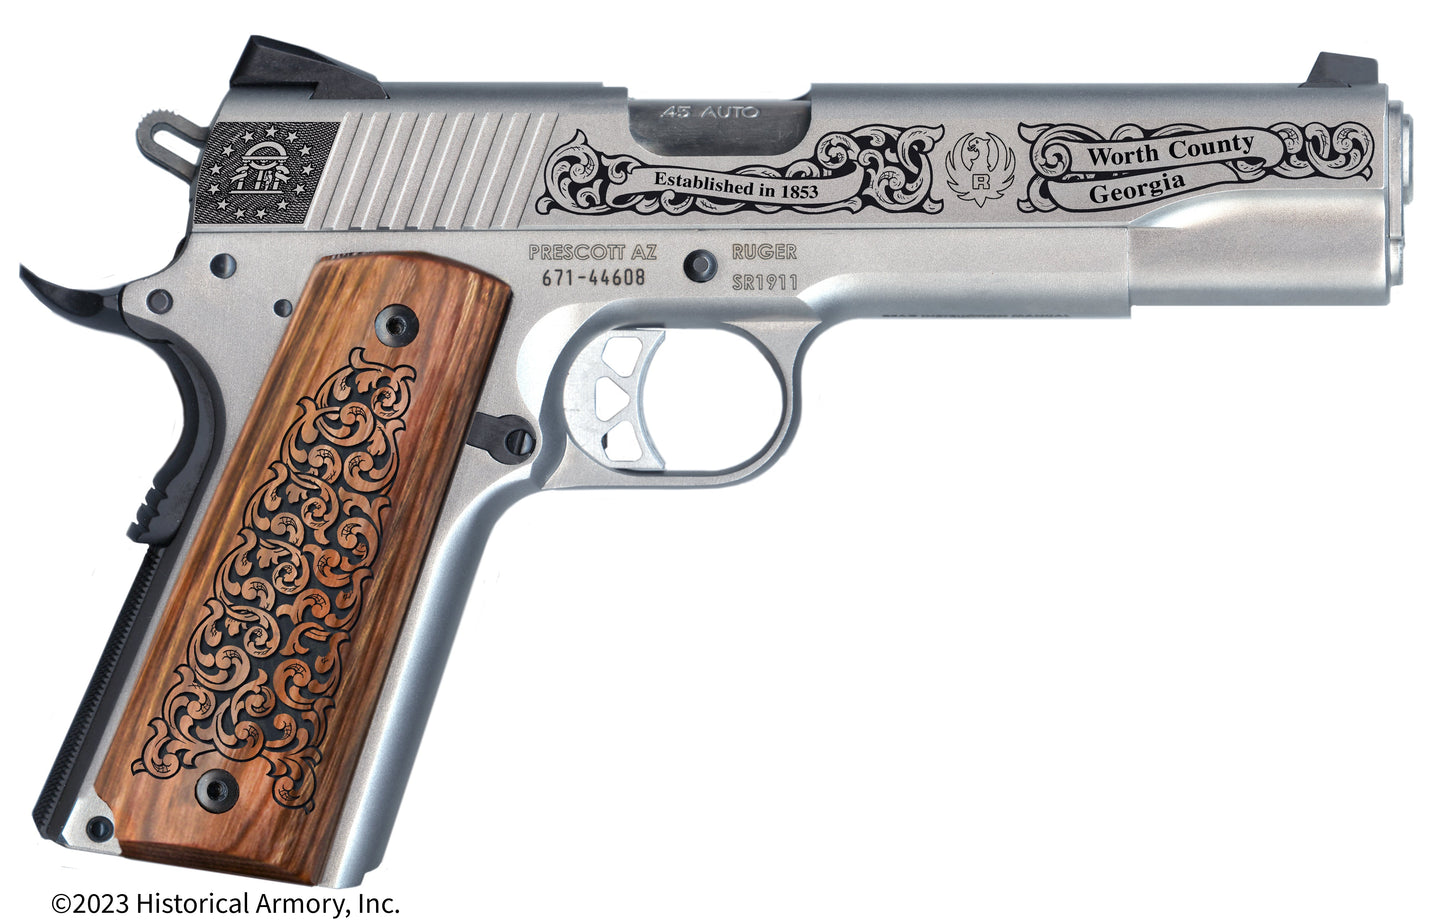 Worth County Georgia Engraved .45 Auto Ruger 1911